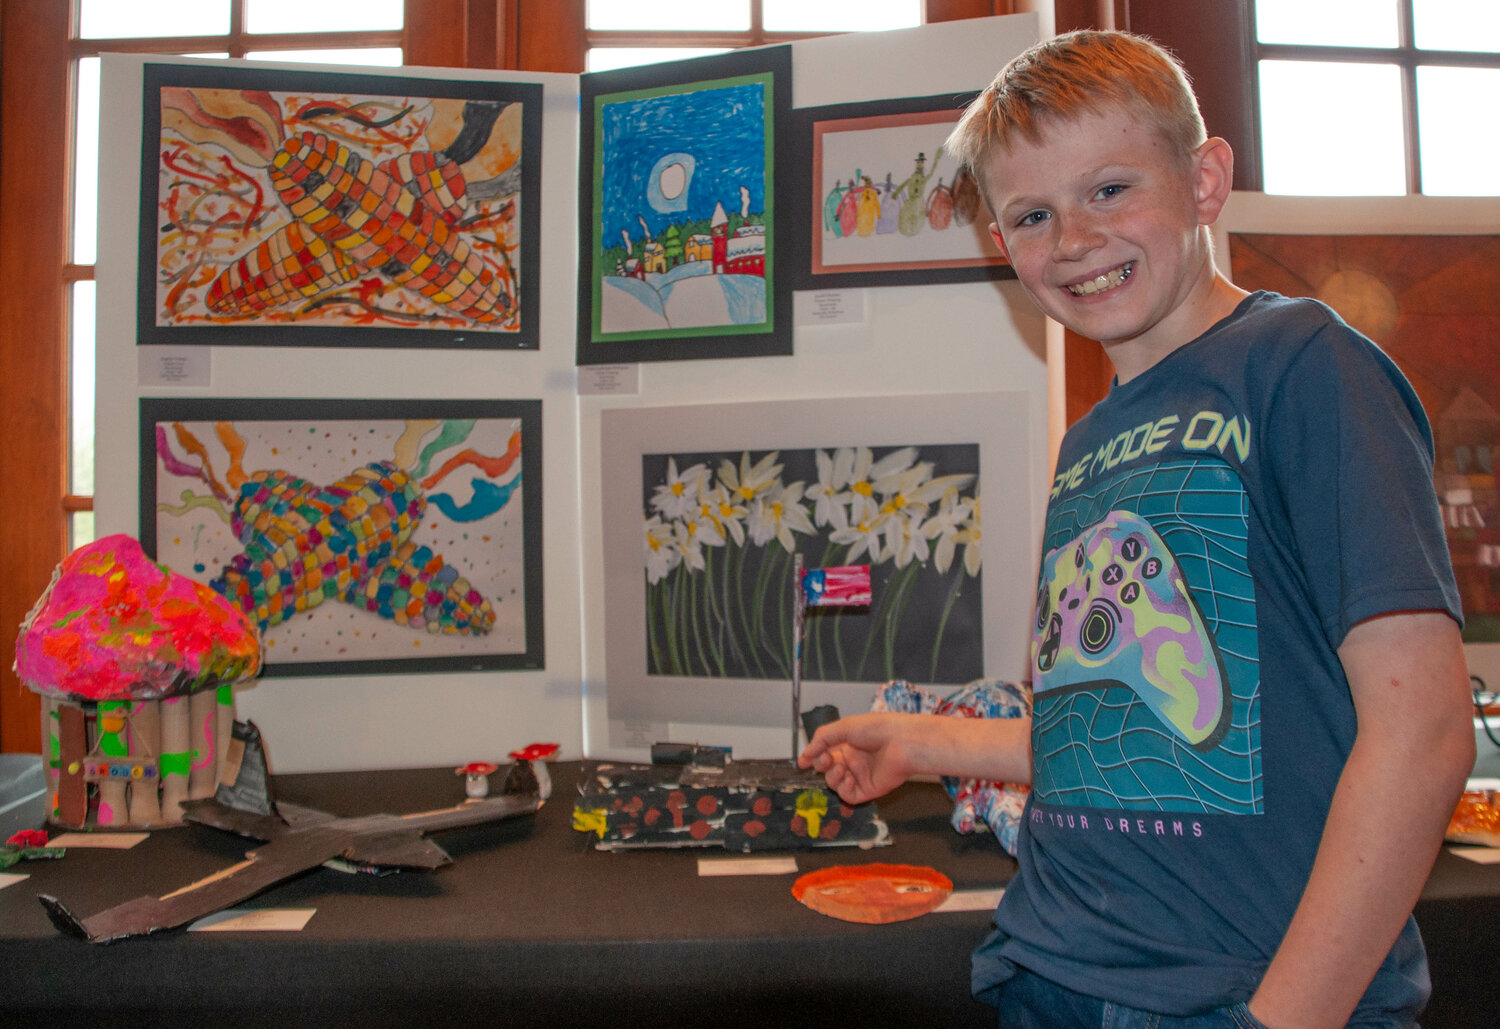 Sullivan West Elementary school's Jace Steffans was all smiles while posing with his Popsicle-stick sculpture at the Sullivan County-Wide PK-12 art show, held at Bethel Woods last weekend.